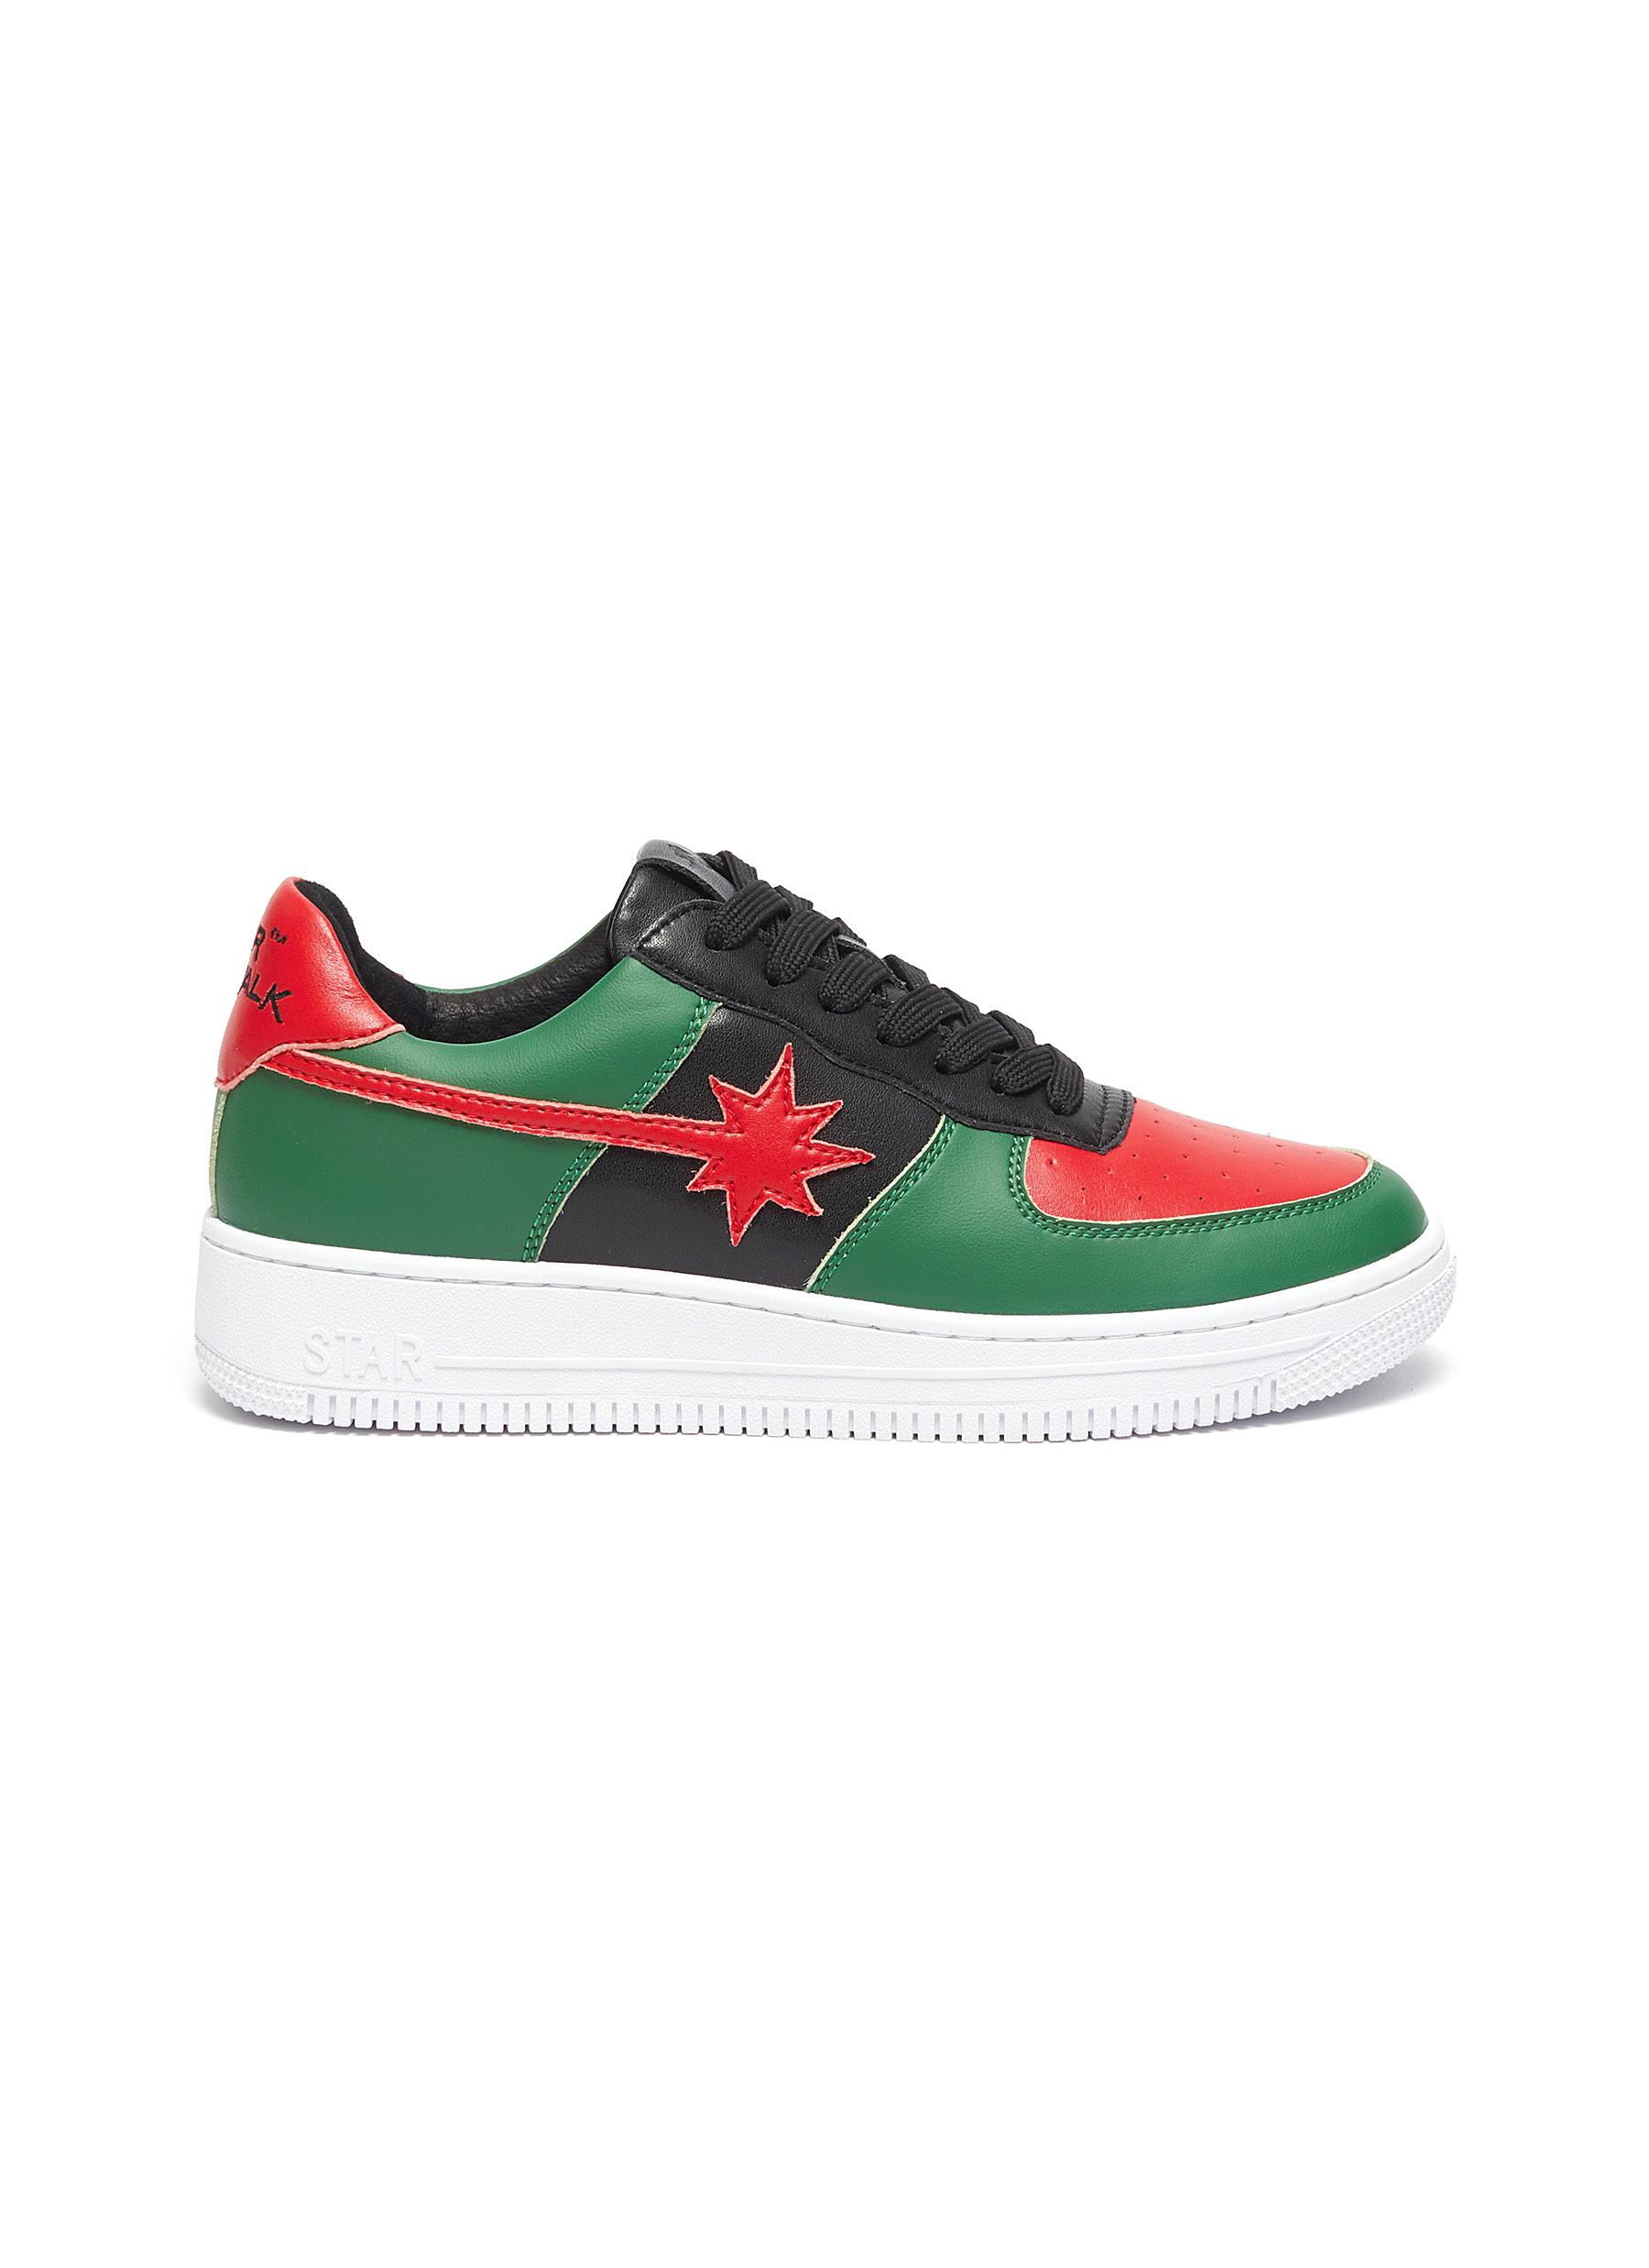 Forbidden City' Green And Red Leather Sneakers